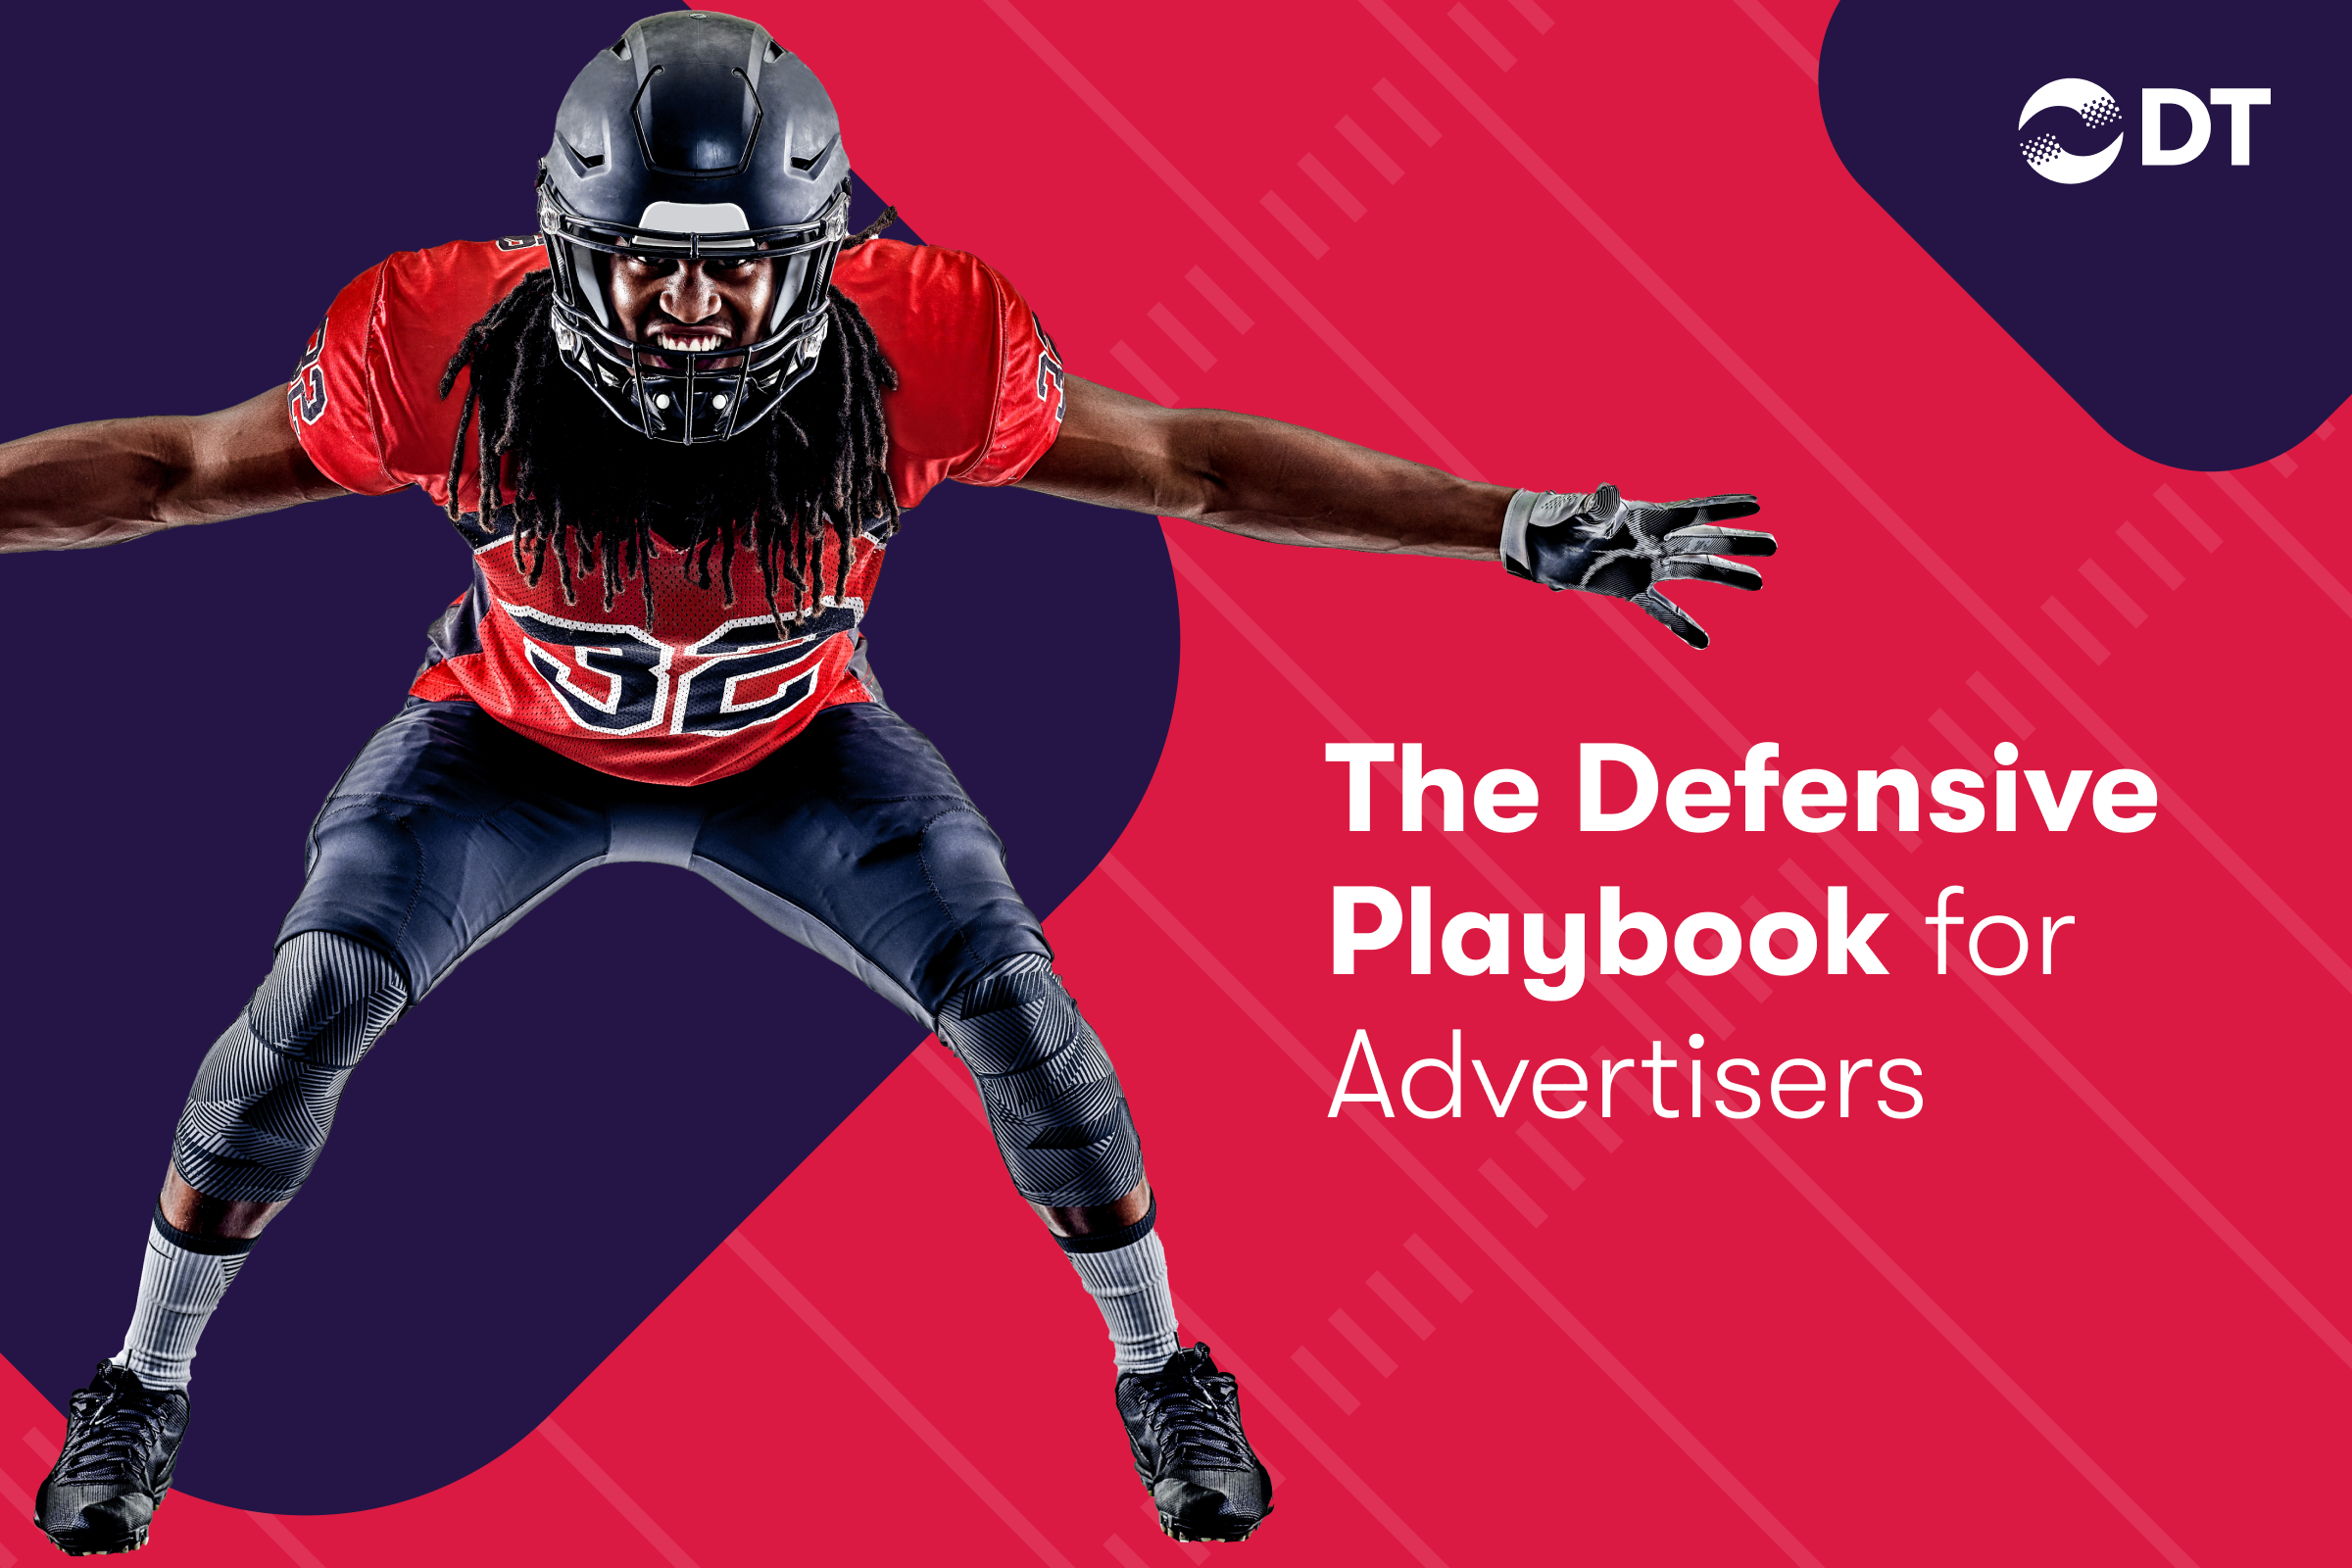 The Defensive Playbook for Advertisers